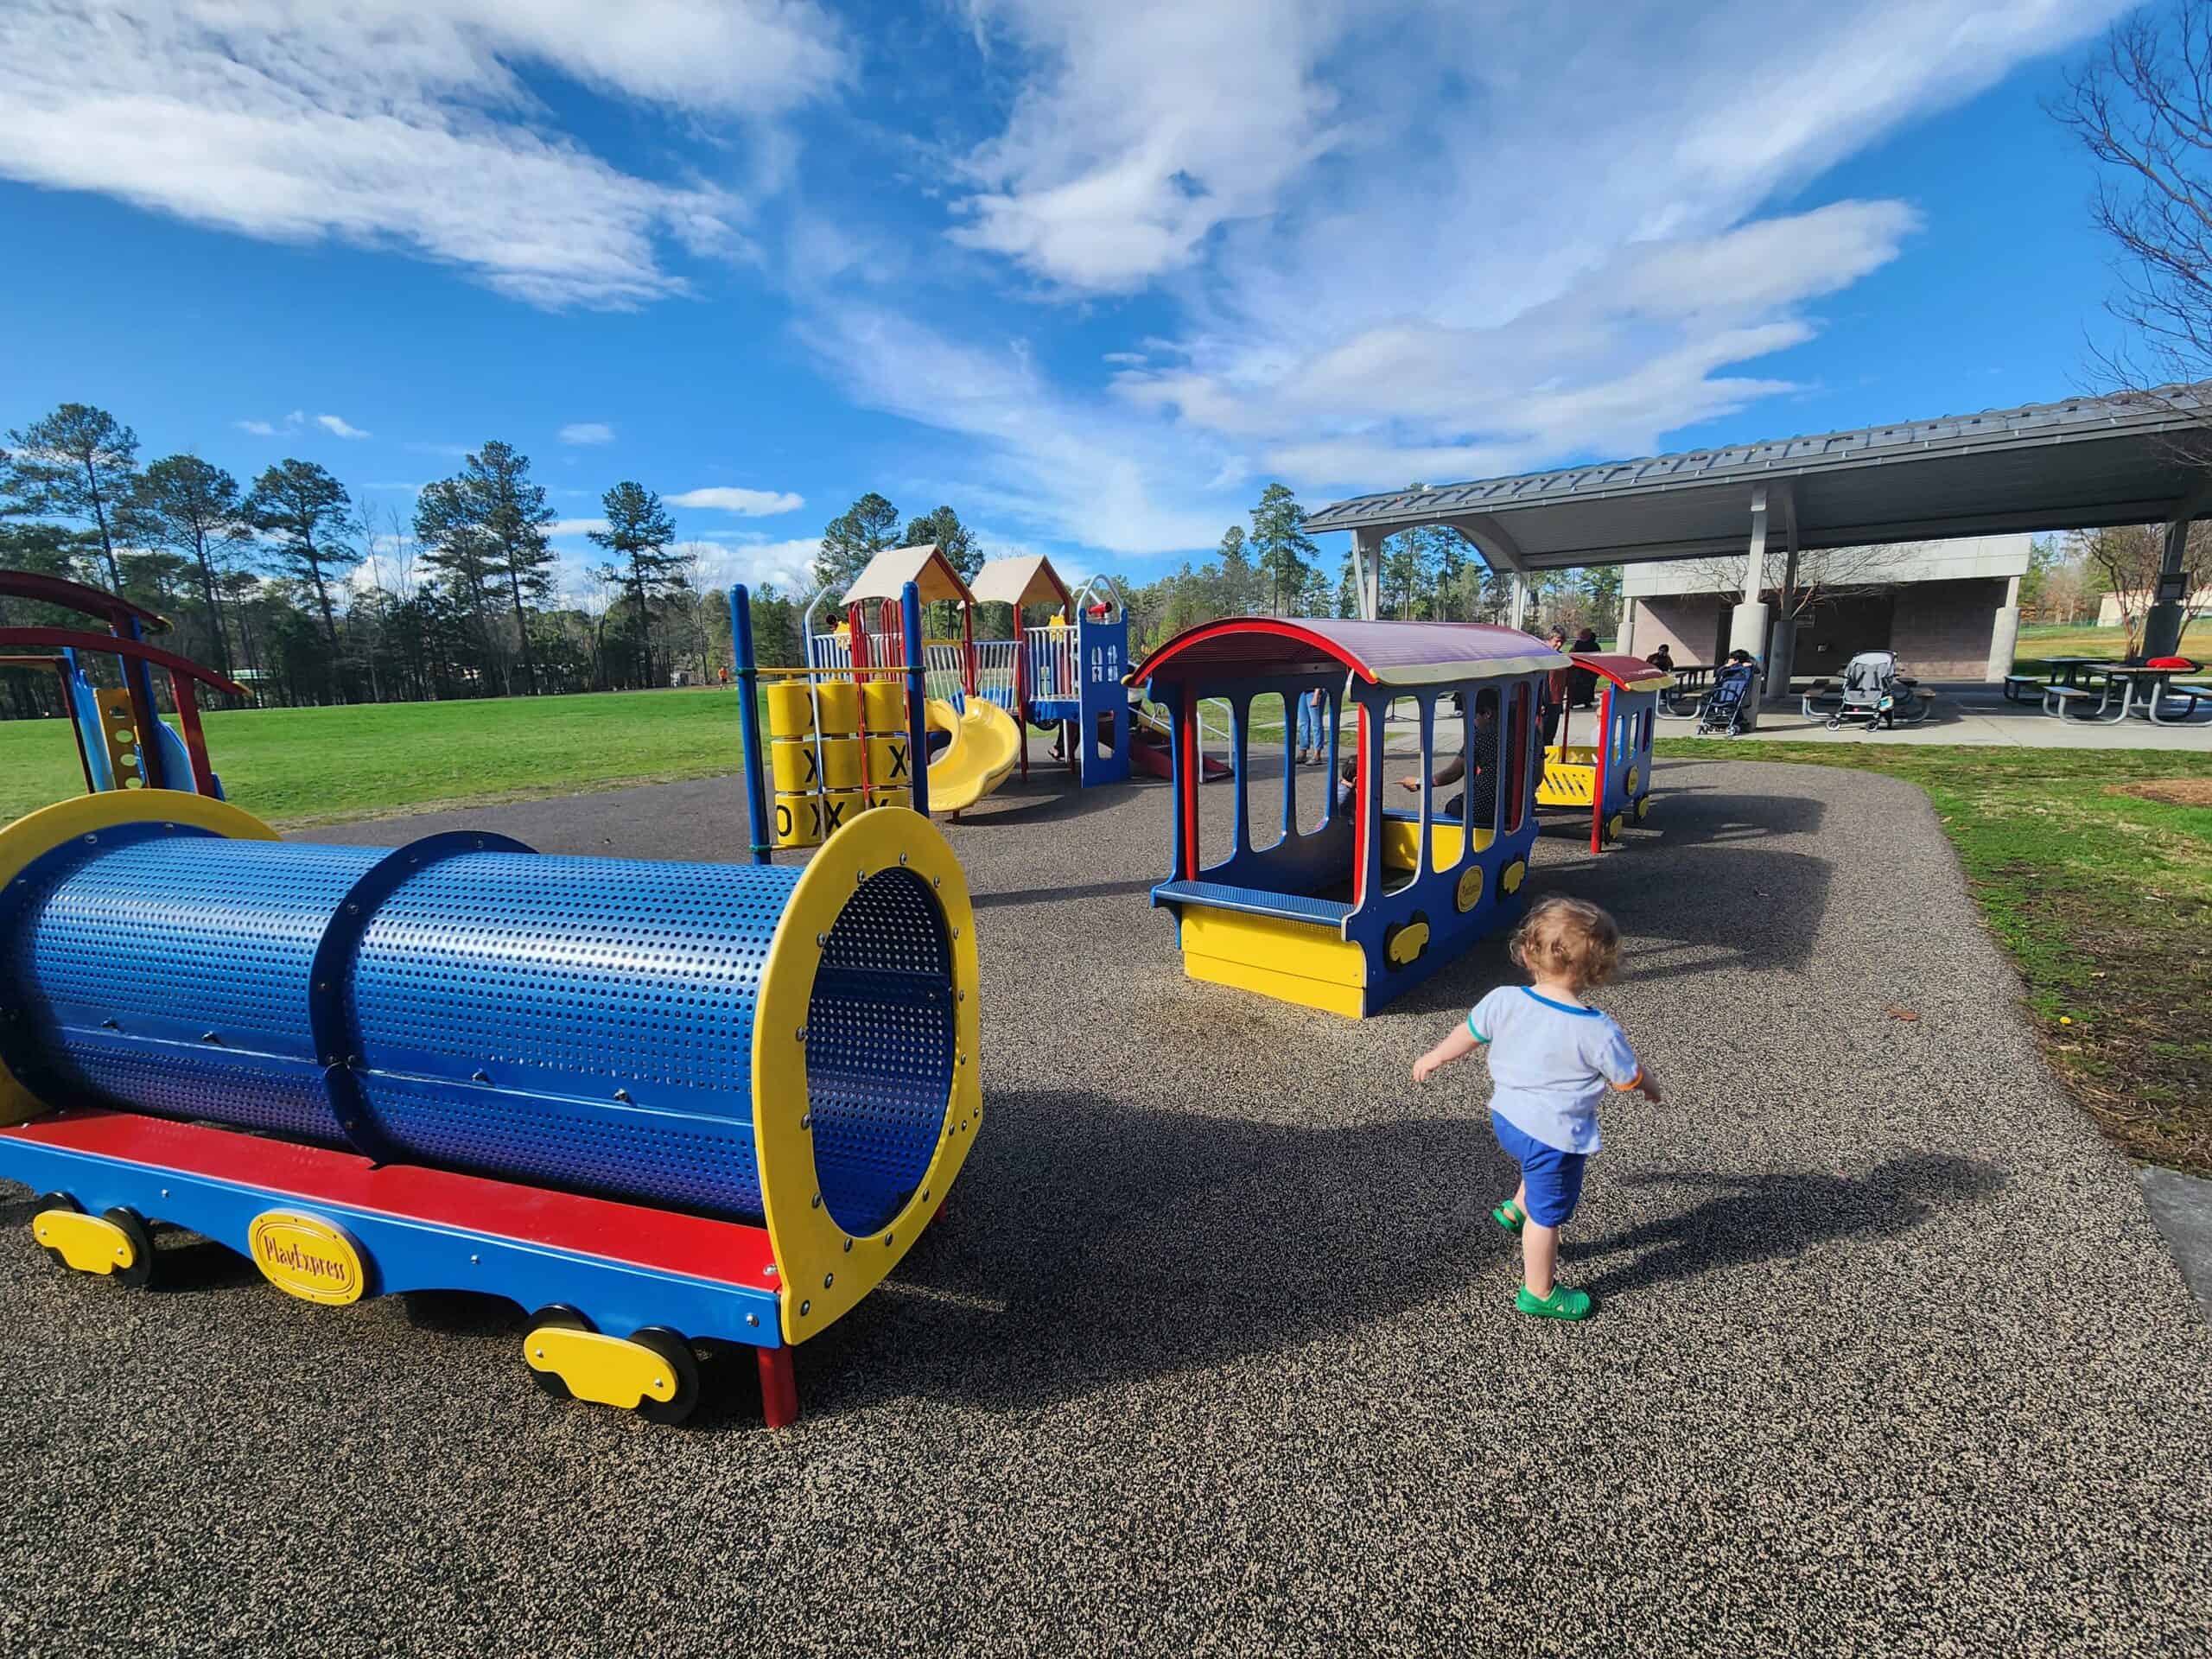 A toddler heads towards the vividly colored play equipment at Brier Creek Park in Raleigh, NC, showcasing blue tunnels, yellow and red train-themed structures, and multiple slides. The park, bathed in sunlight, also offers picnic areas under a large pavilion in the background, inviting a perfect day out for families.